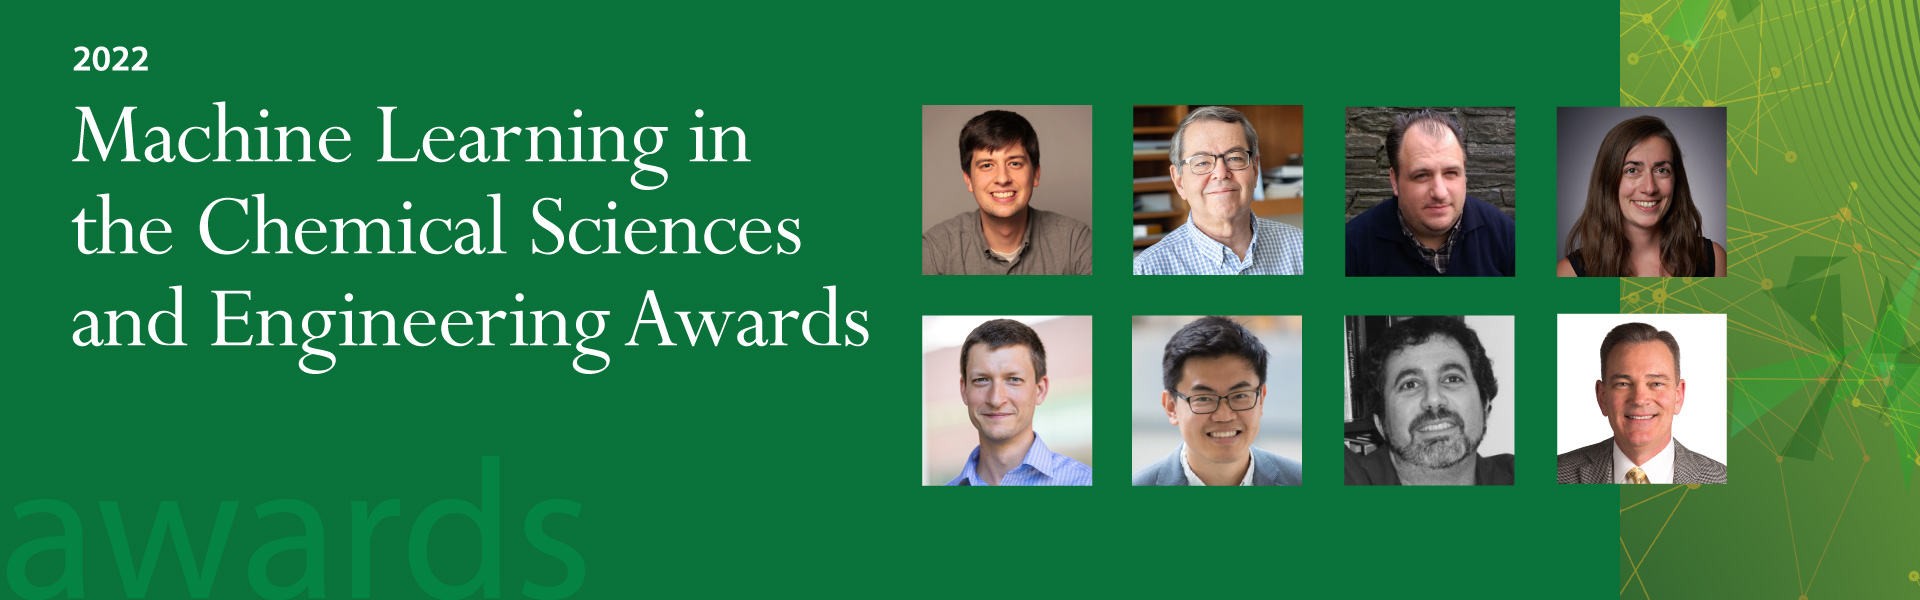 2022 Machine Learning in the Chemical Sciences and Engineering Awards